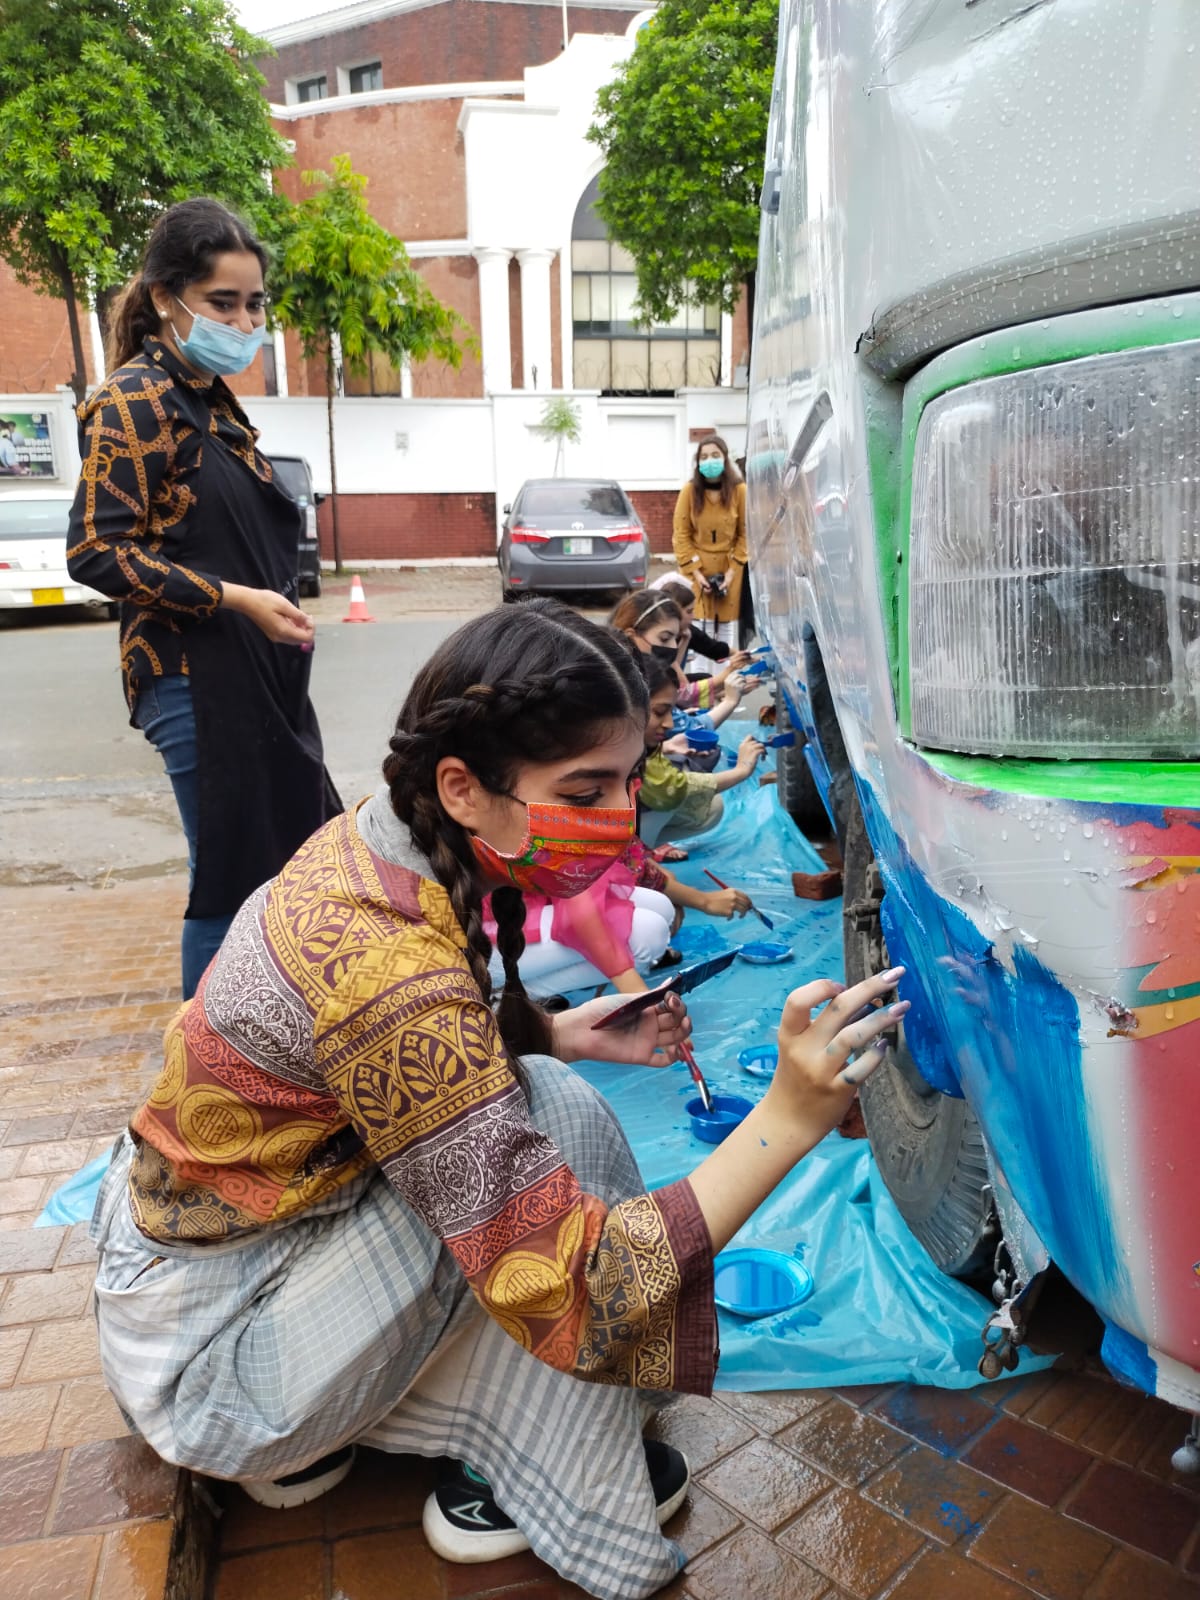 Around 100 students, including students of art and design from prominent educational institutes of Pakistan, joined the artists in a series of workshops to paint the buses.